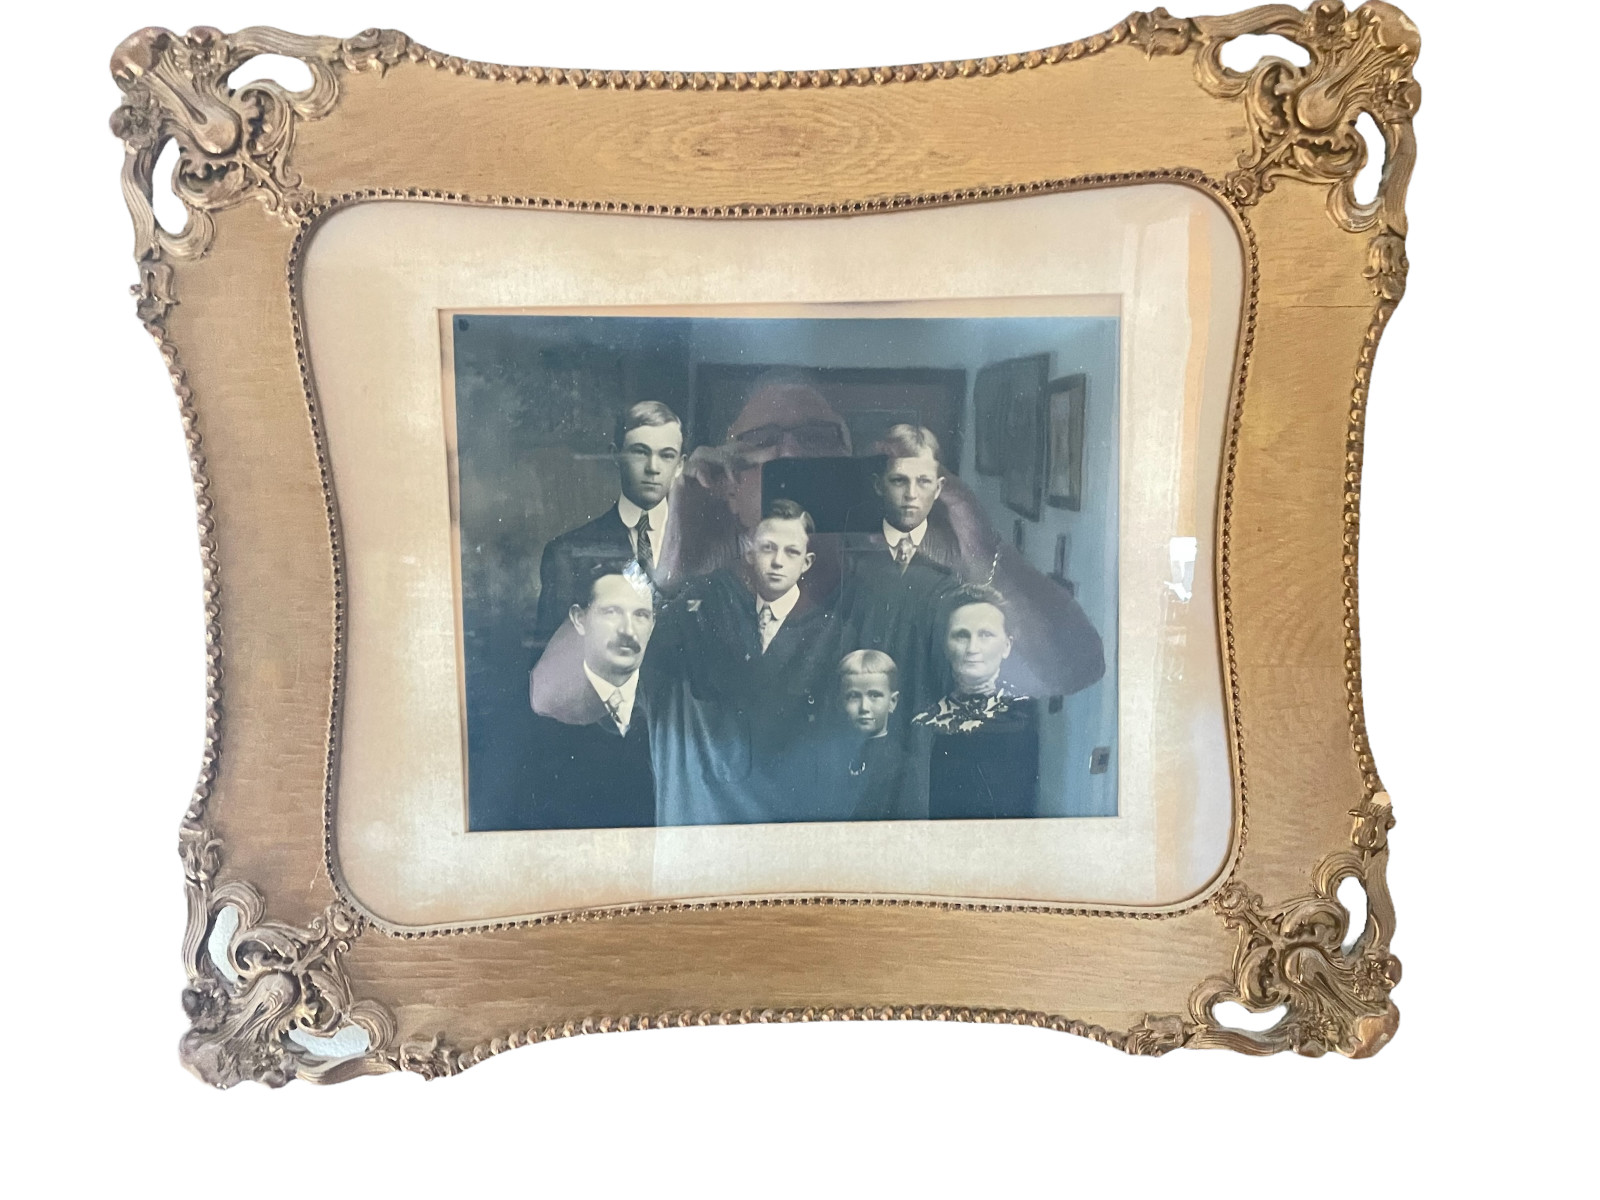 image of a vintage picture of a early 20th century family in a small, tan-colored ornate frame